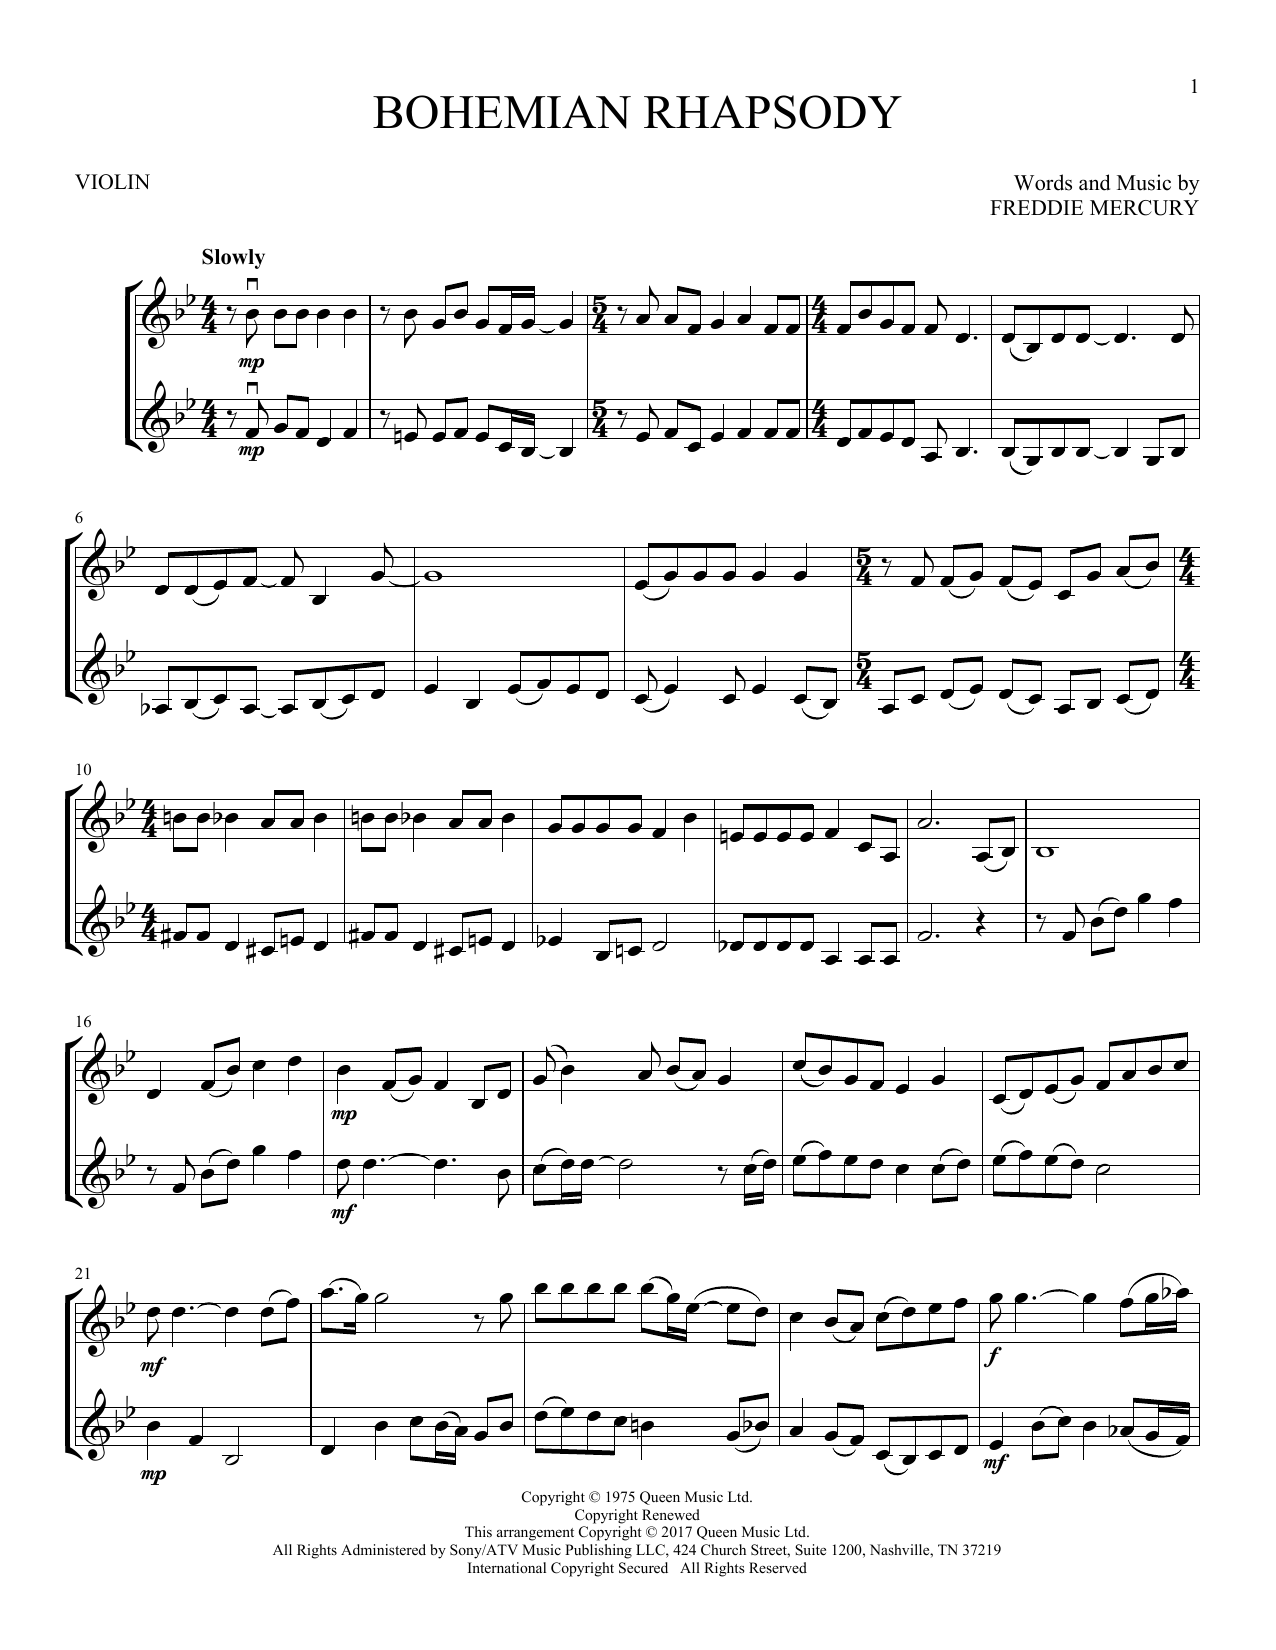 bohemian rhapsody notes for piano pdf notes